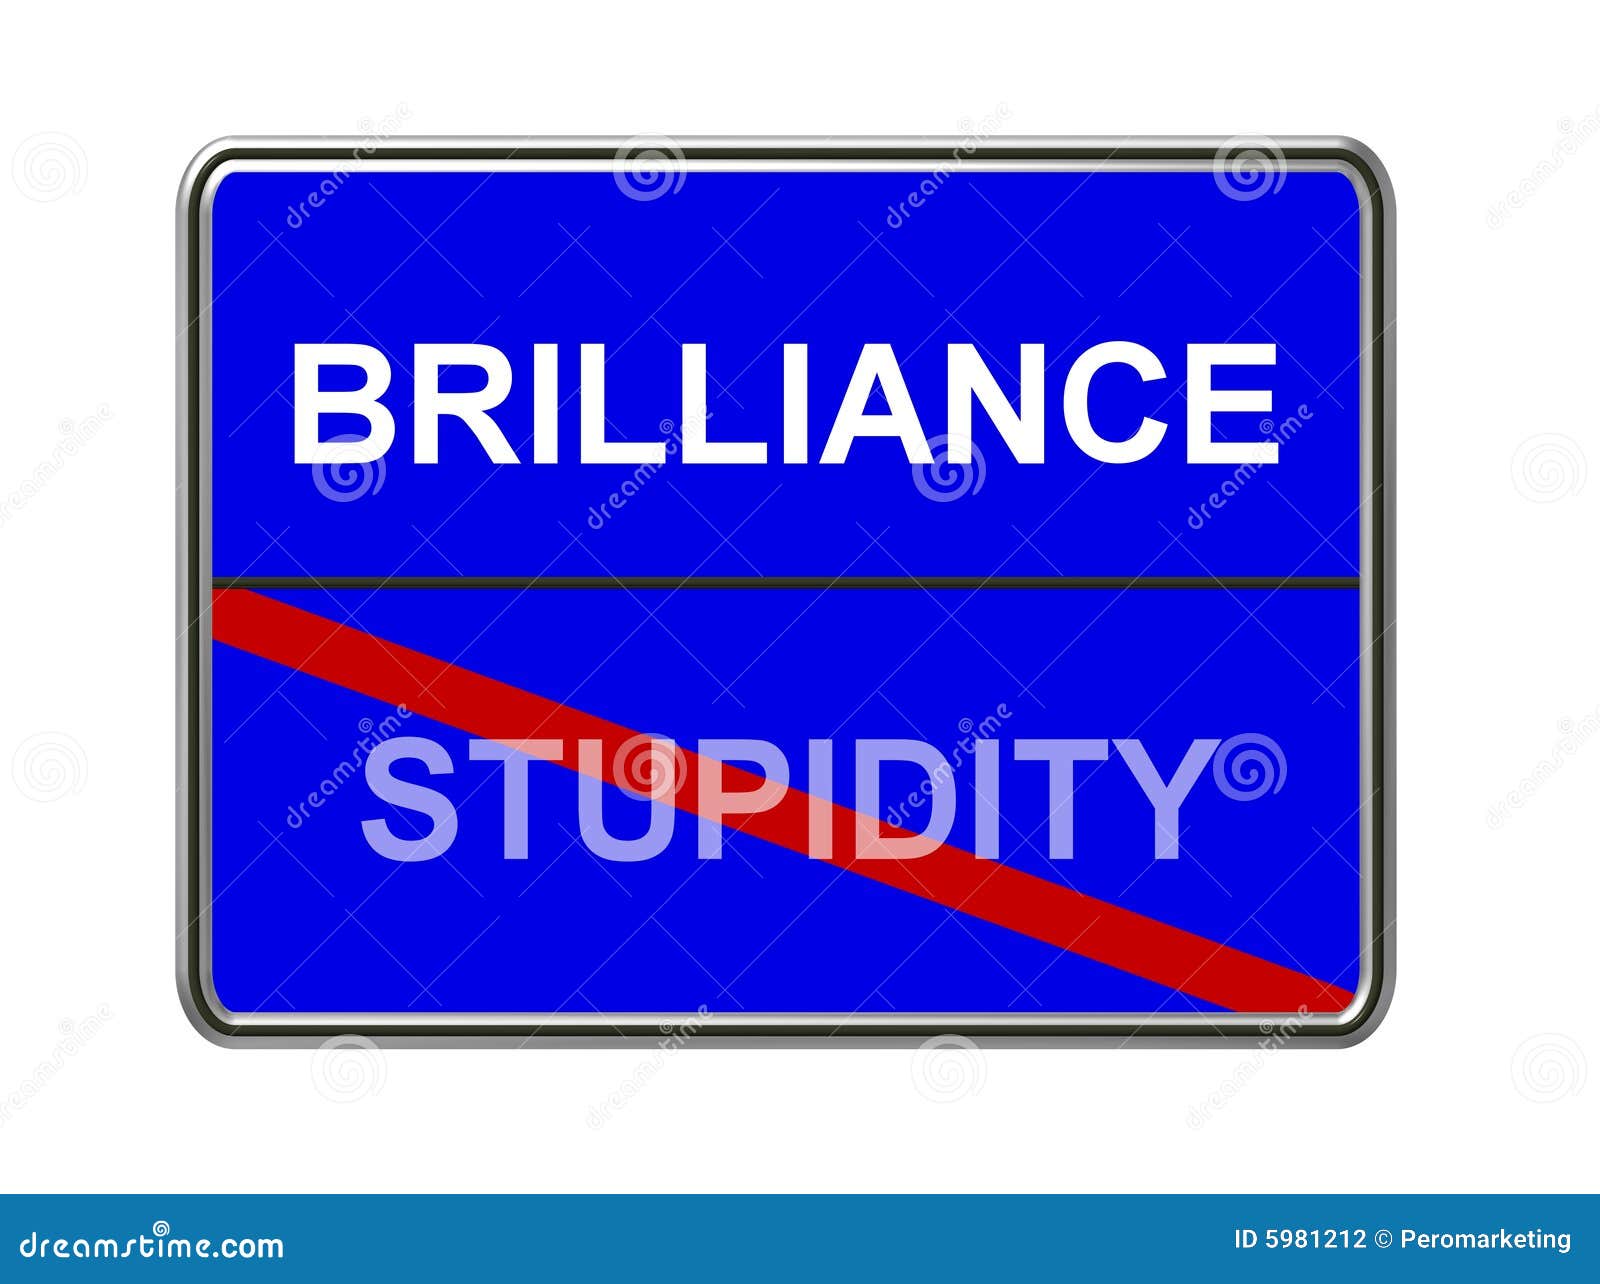 brilliance is not stupidity